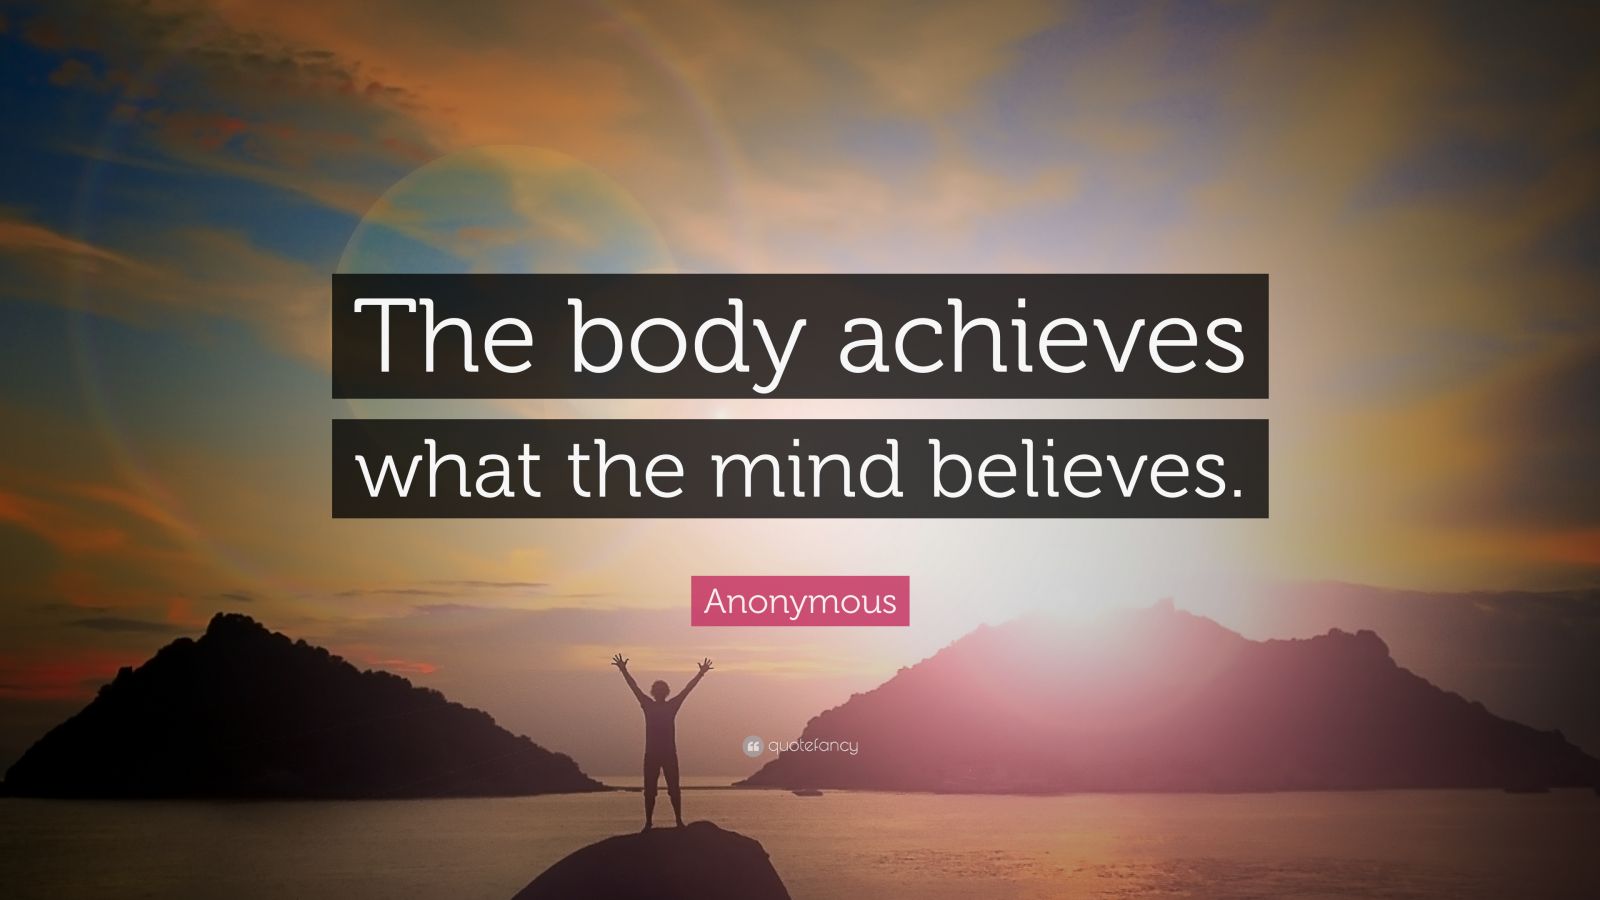 Anonymous Quote: “The body achieves what the mind believes.” (26